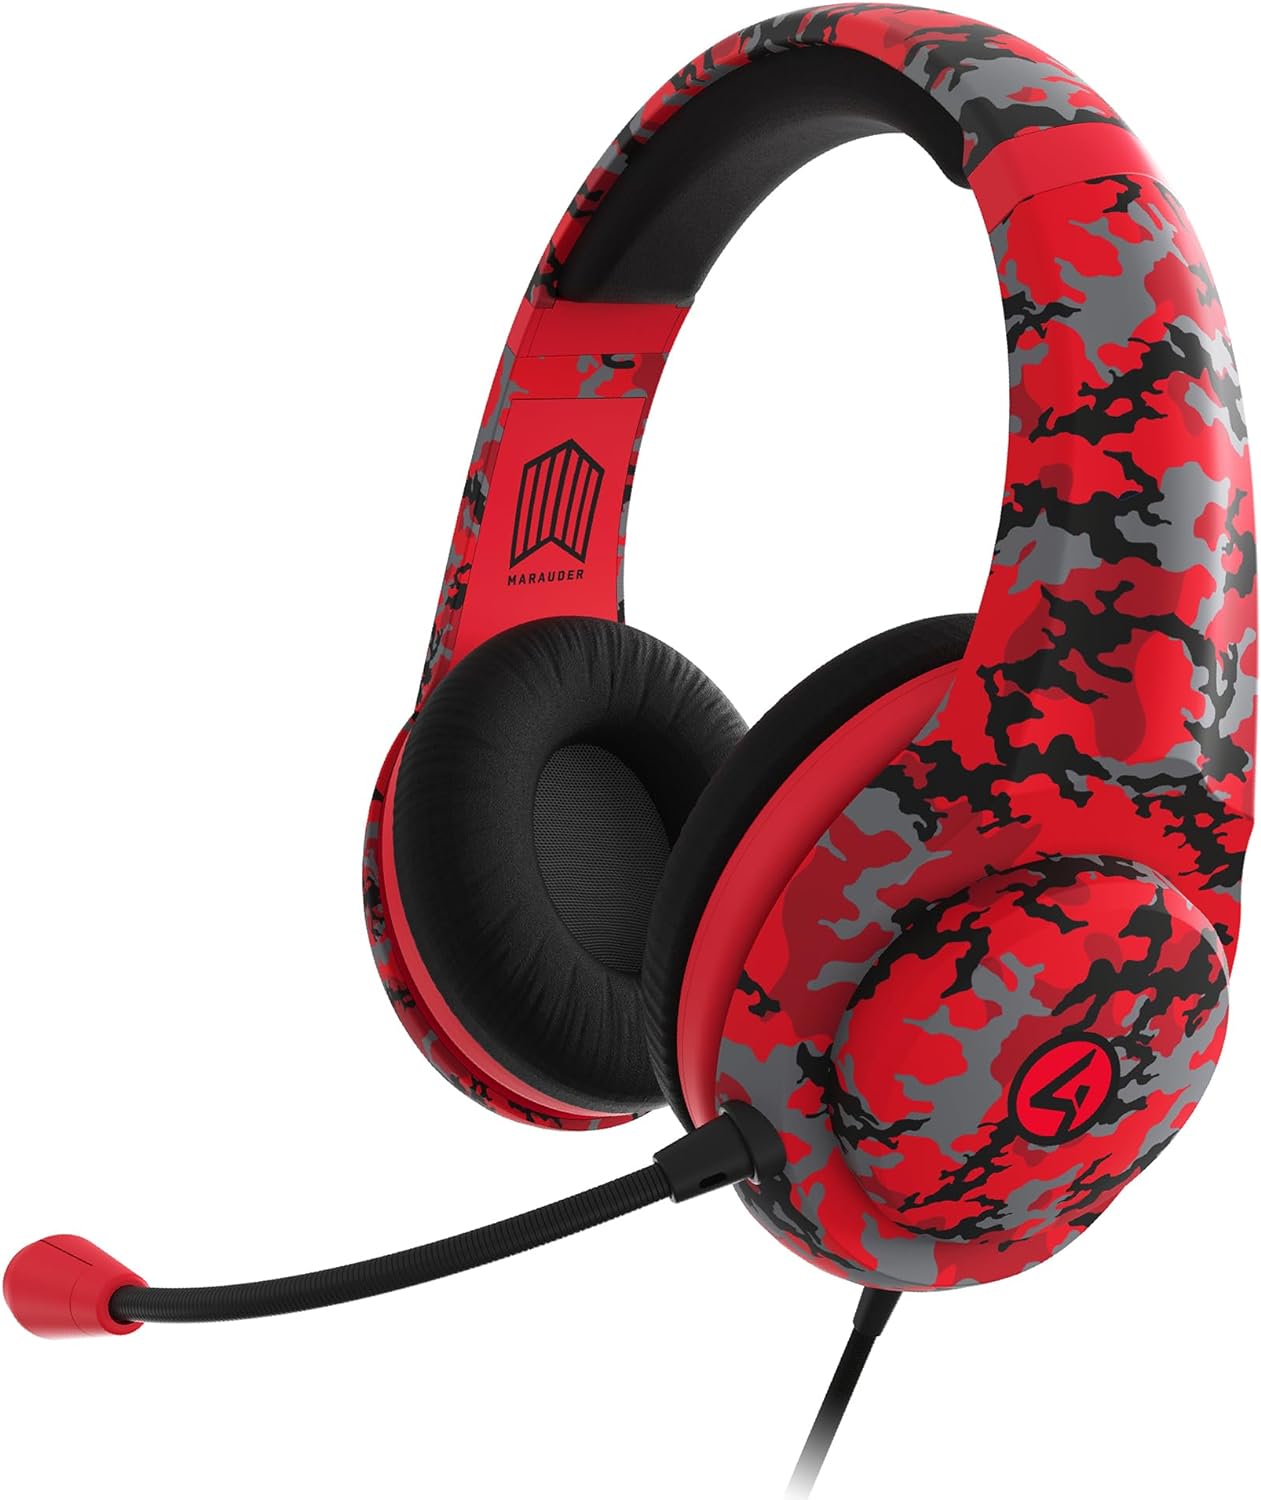 Stealth Marauder Gaming Headset - Red Camo